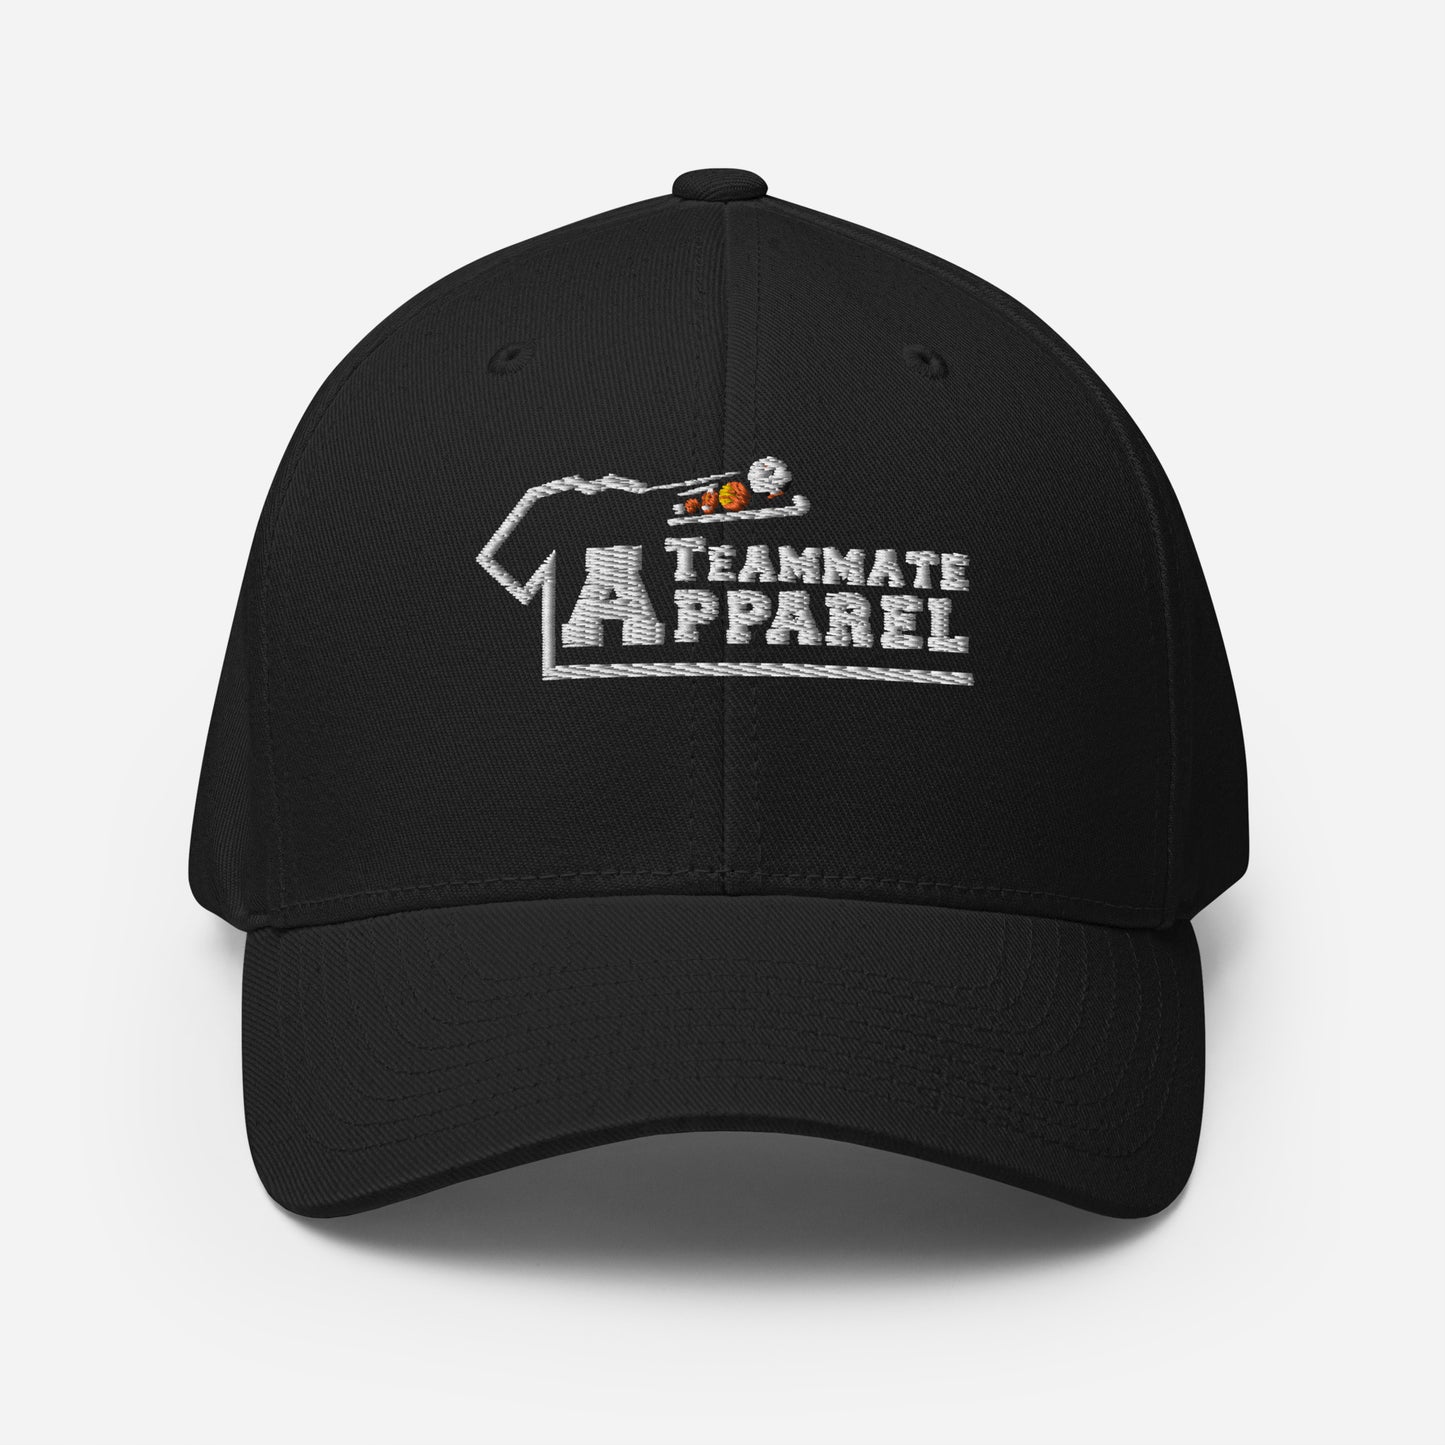 Teammate Apparel Embroidery Structured Twill Cap